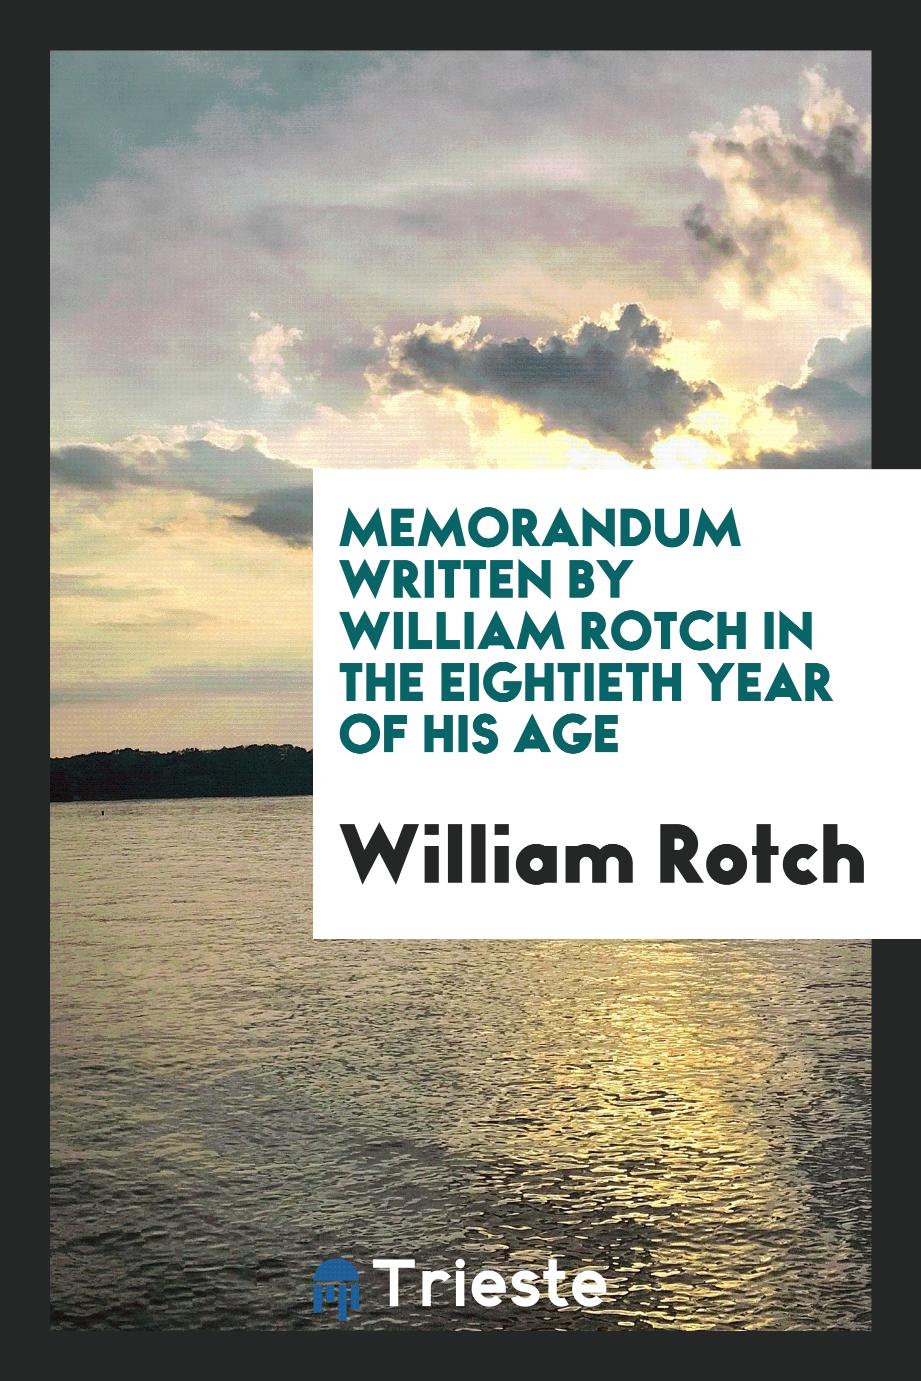 Memorandum Written by William Rotch in the Eightieth Year of His Age